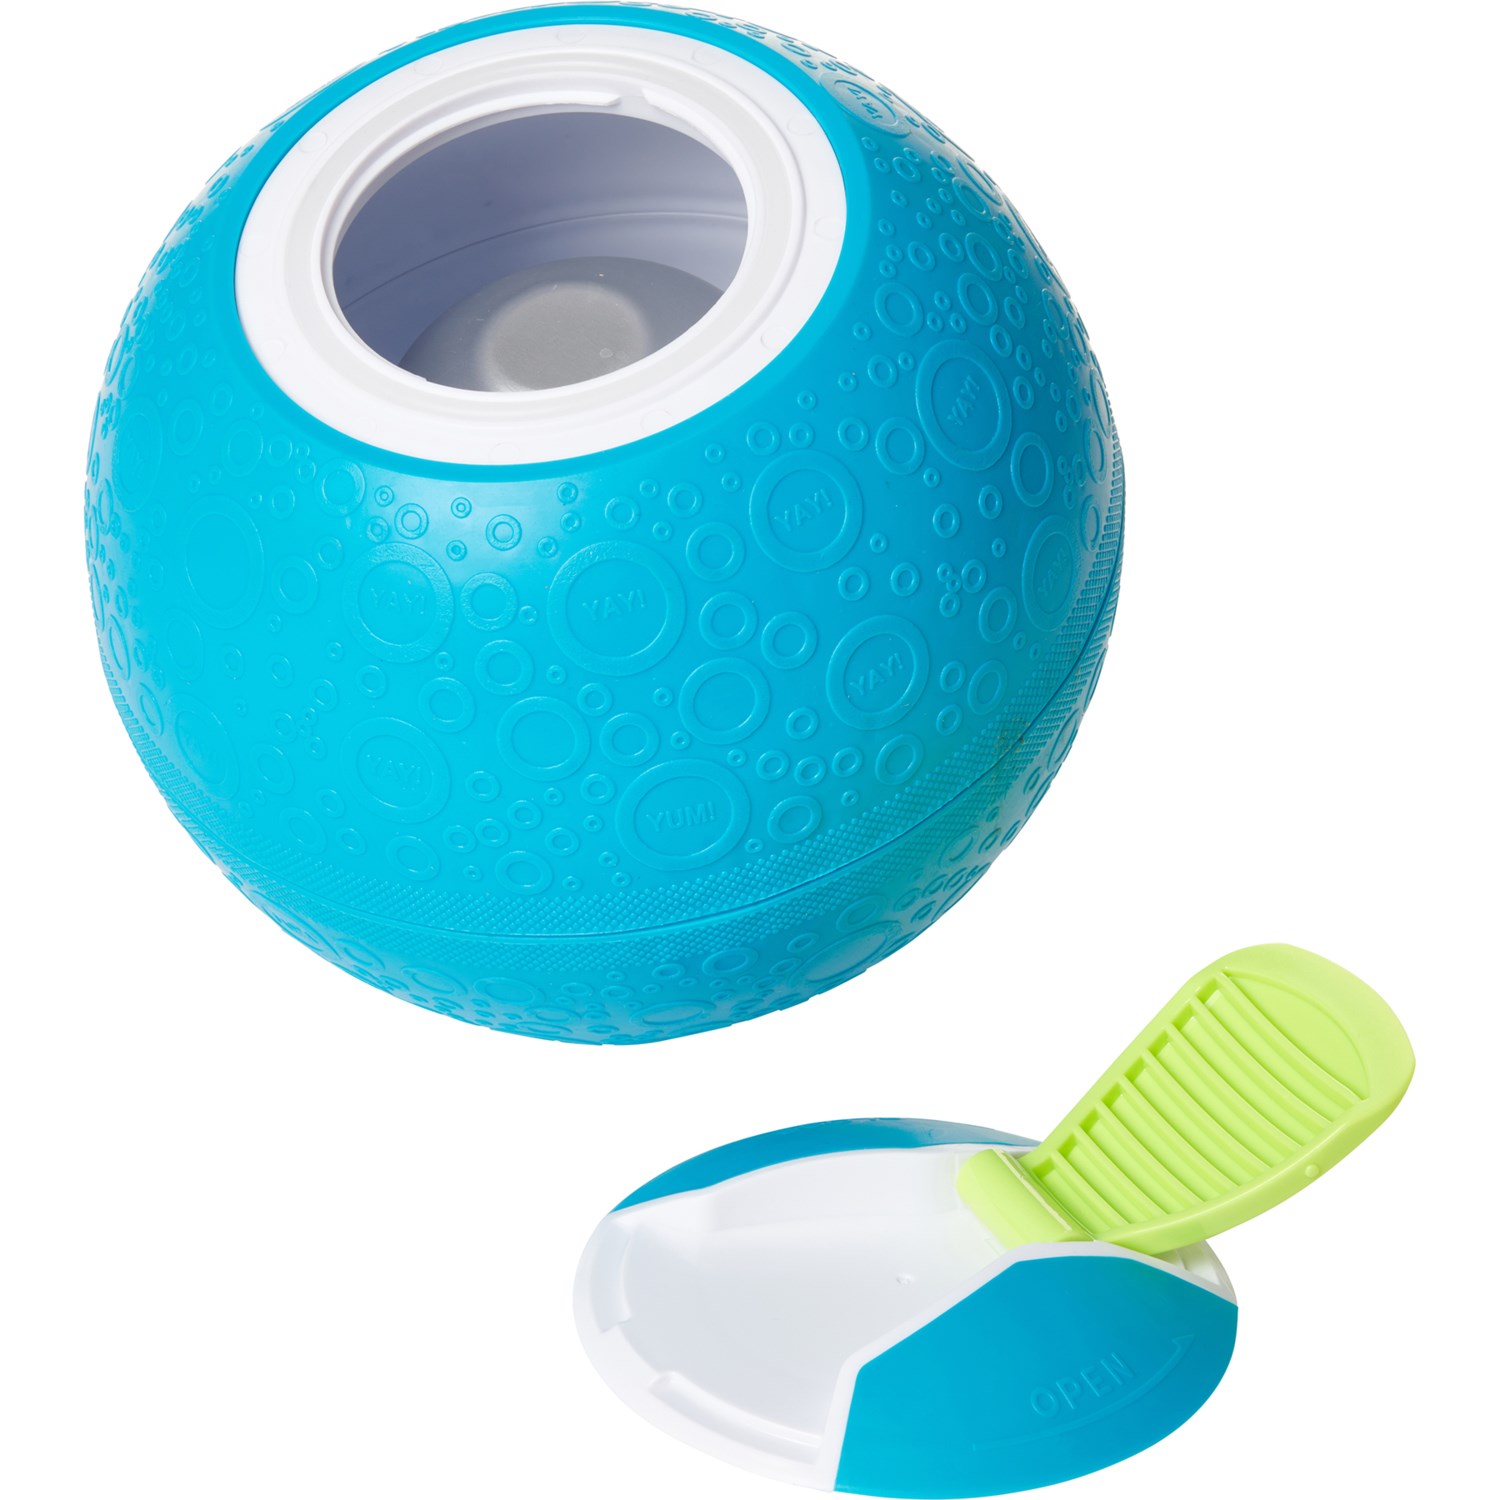  Yay Labs SoftShell Ice Cream Ball Blue, Pint Size : Home &  Kitchen